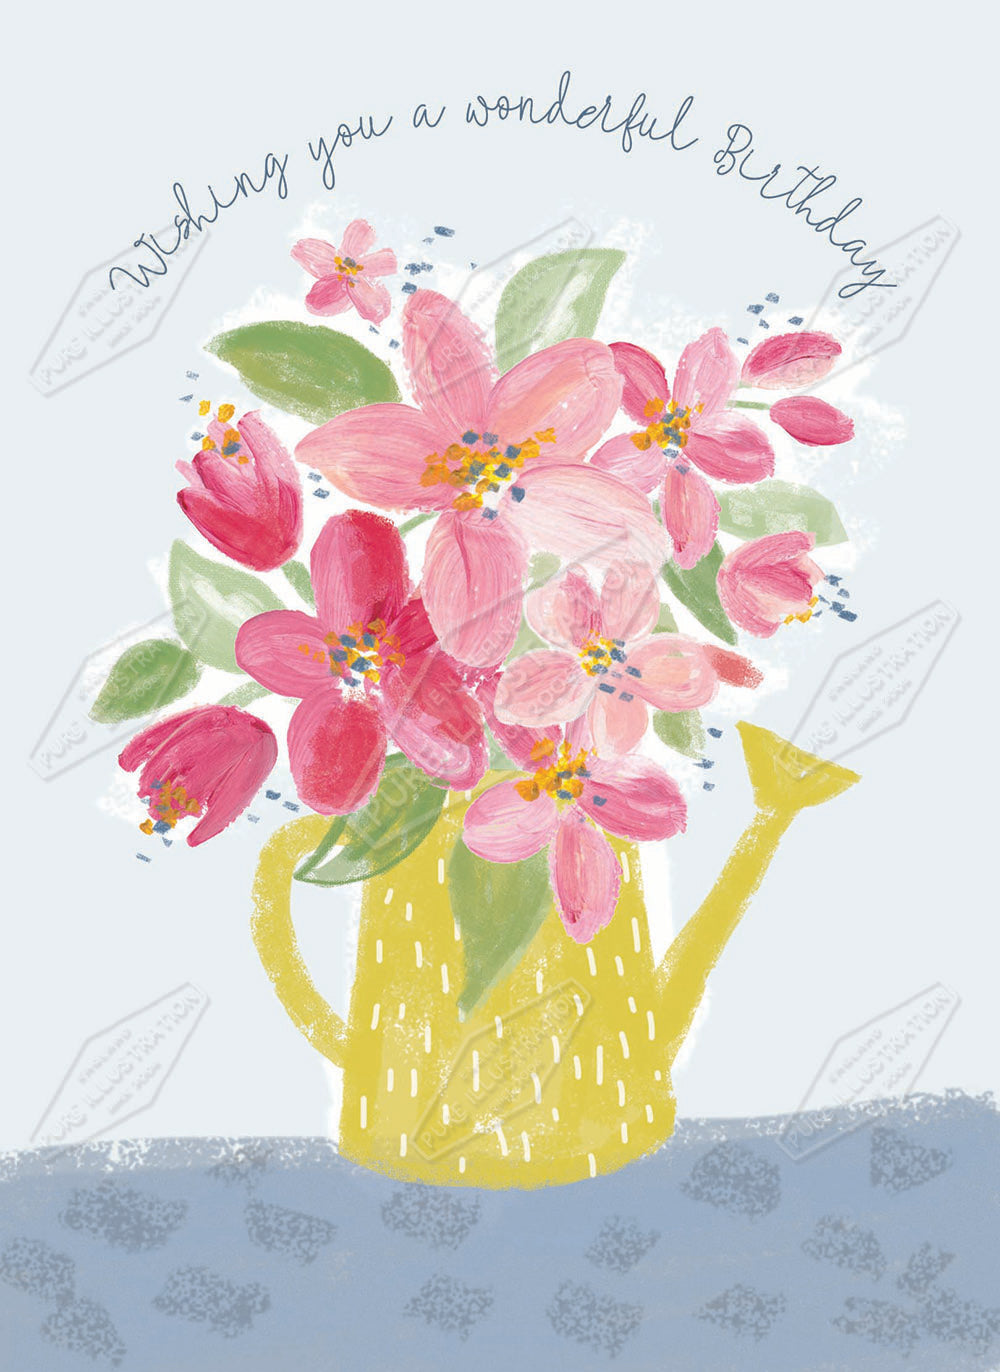 00034568SLA- Sarah Lake is represented by Pure Art Licensing Agency - Birthday Greeting Card Design